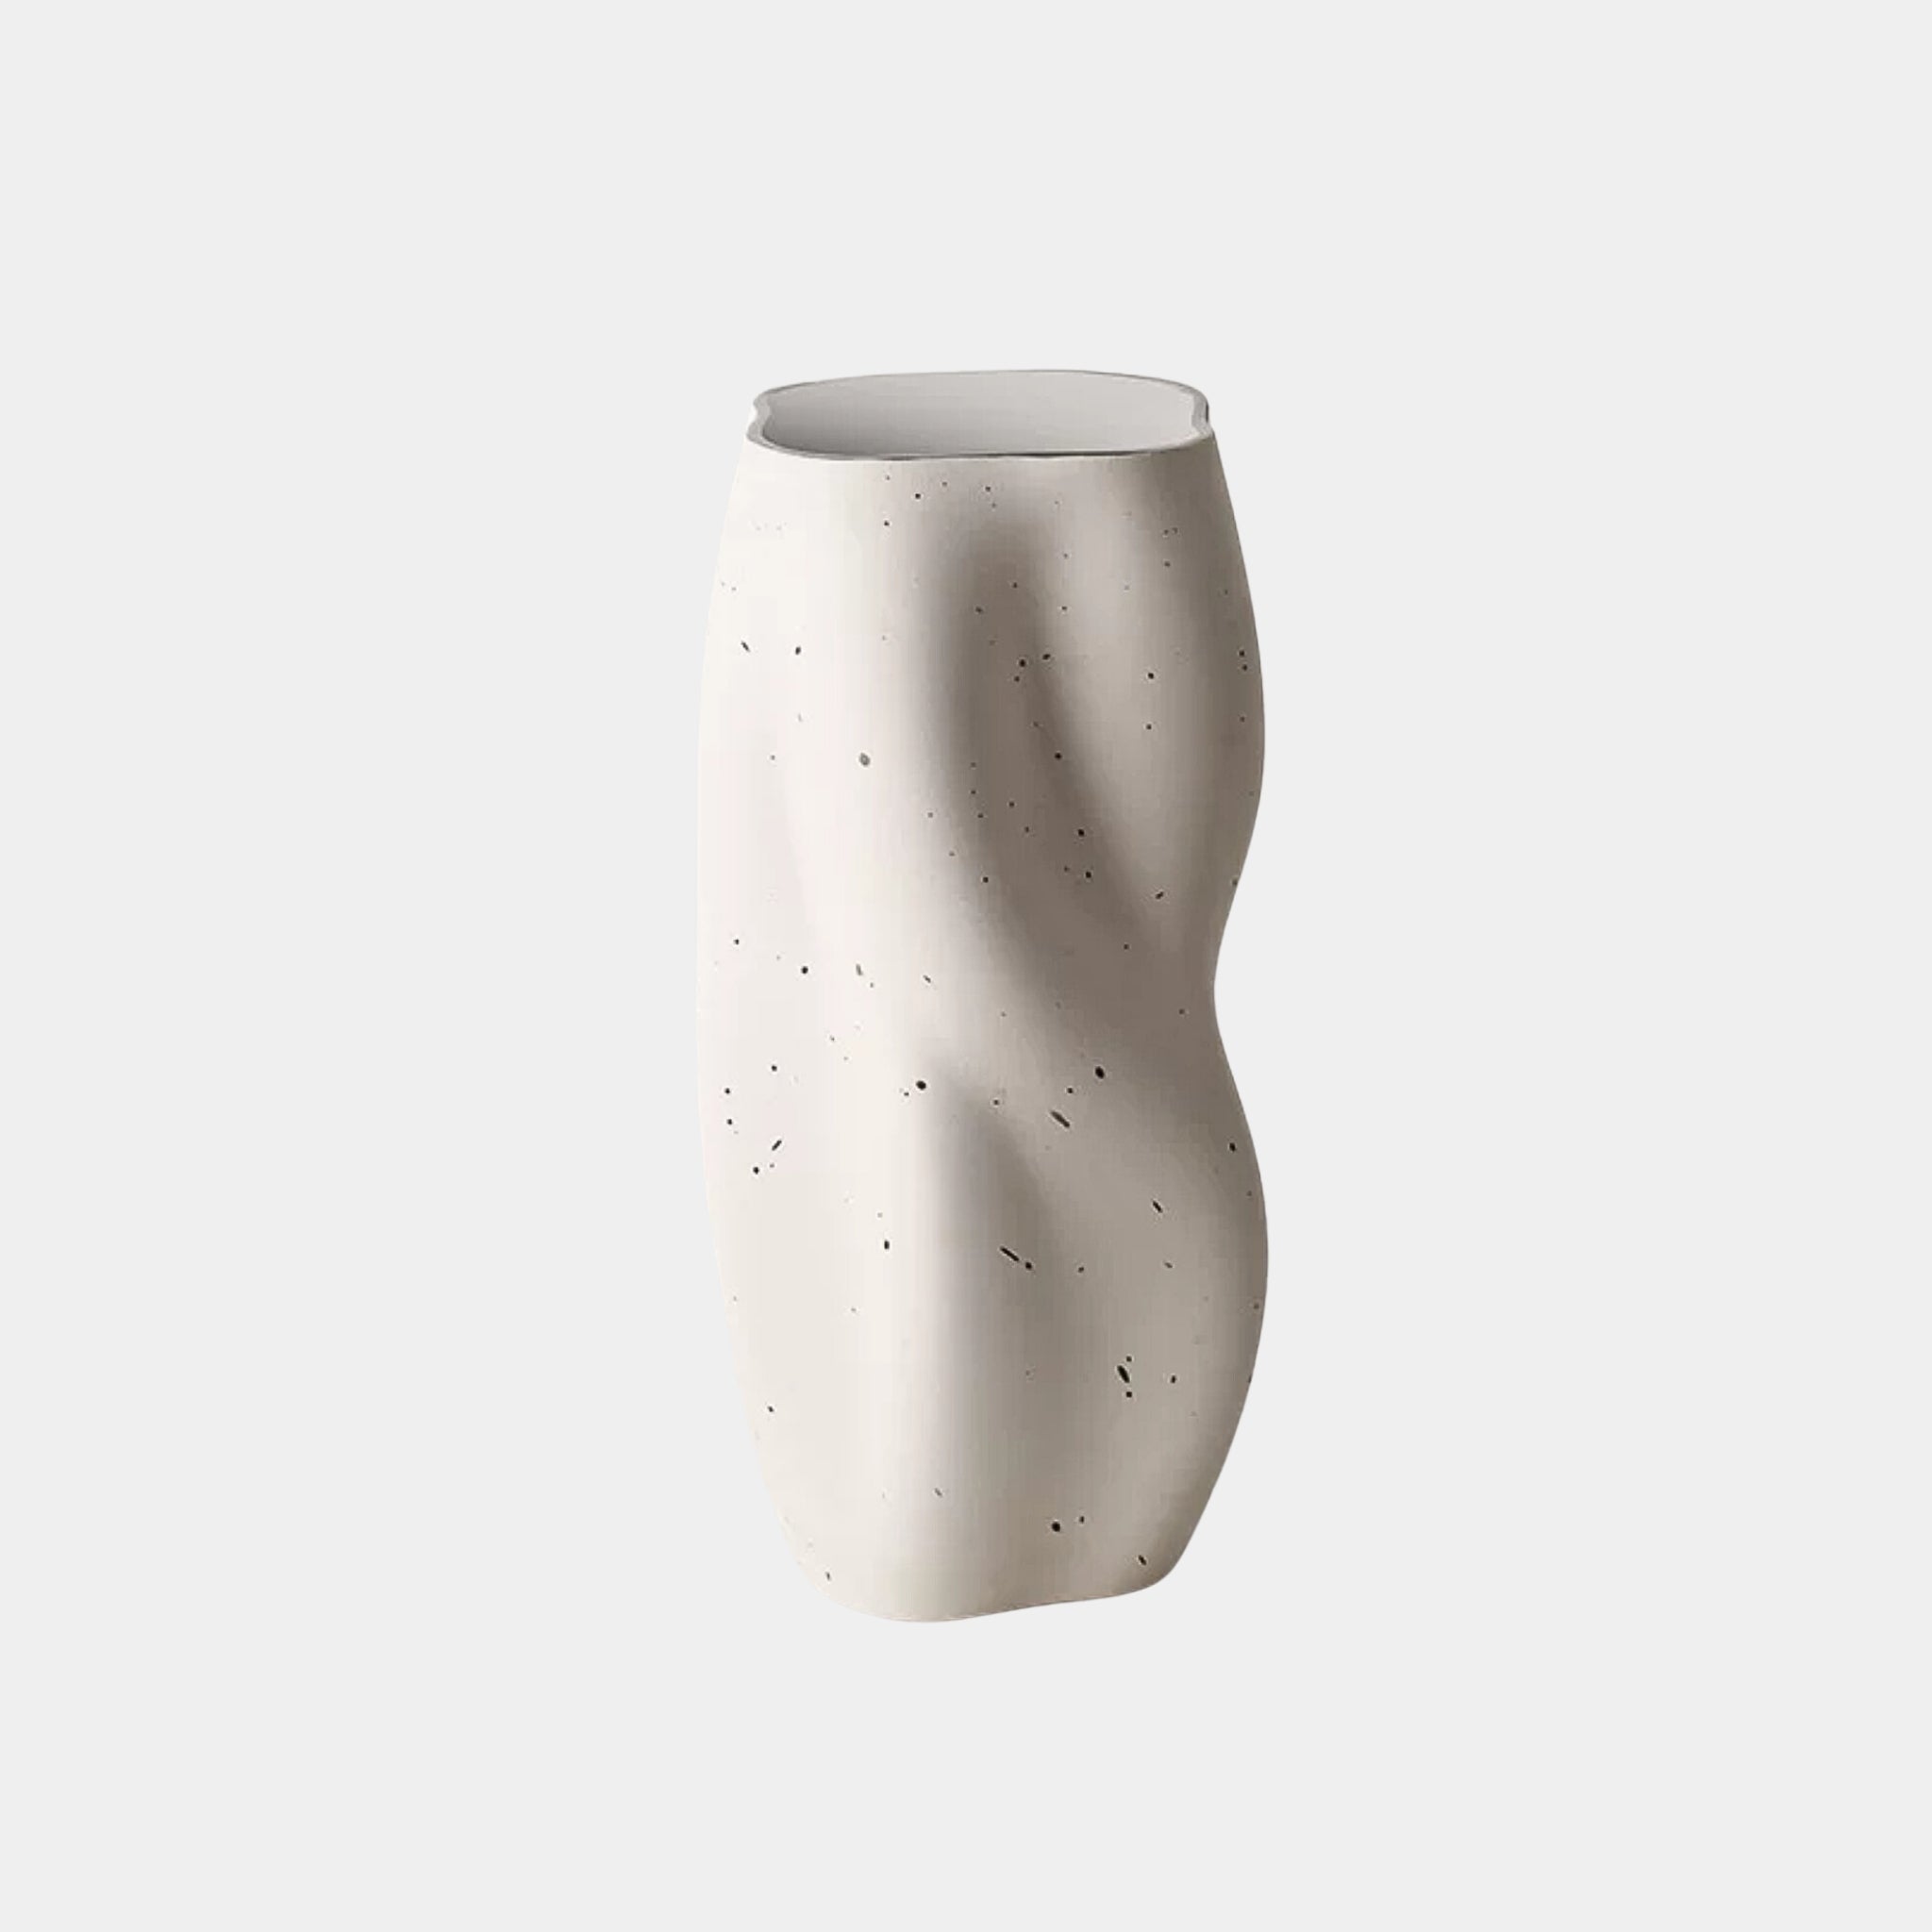 Ceramic Vase | Twisted Speckled White Vase with Silver Rim - The Feelter